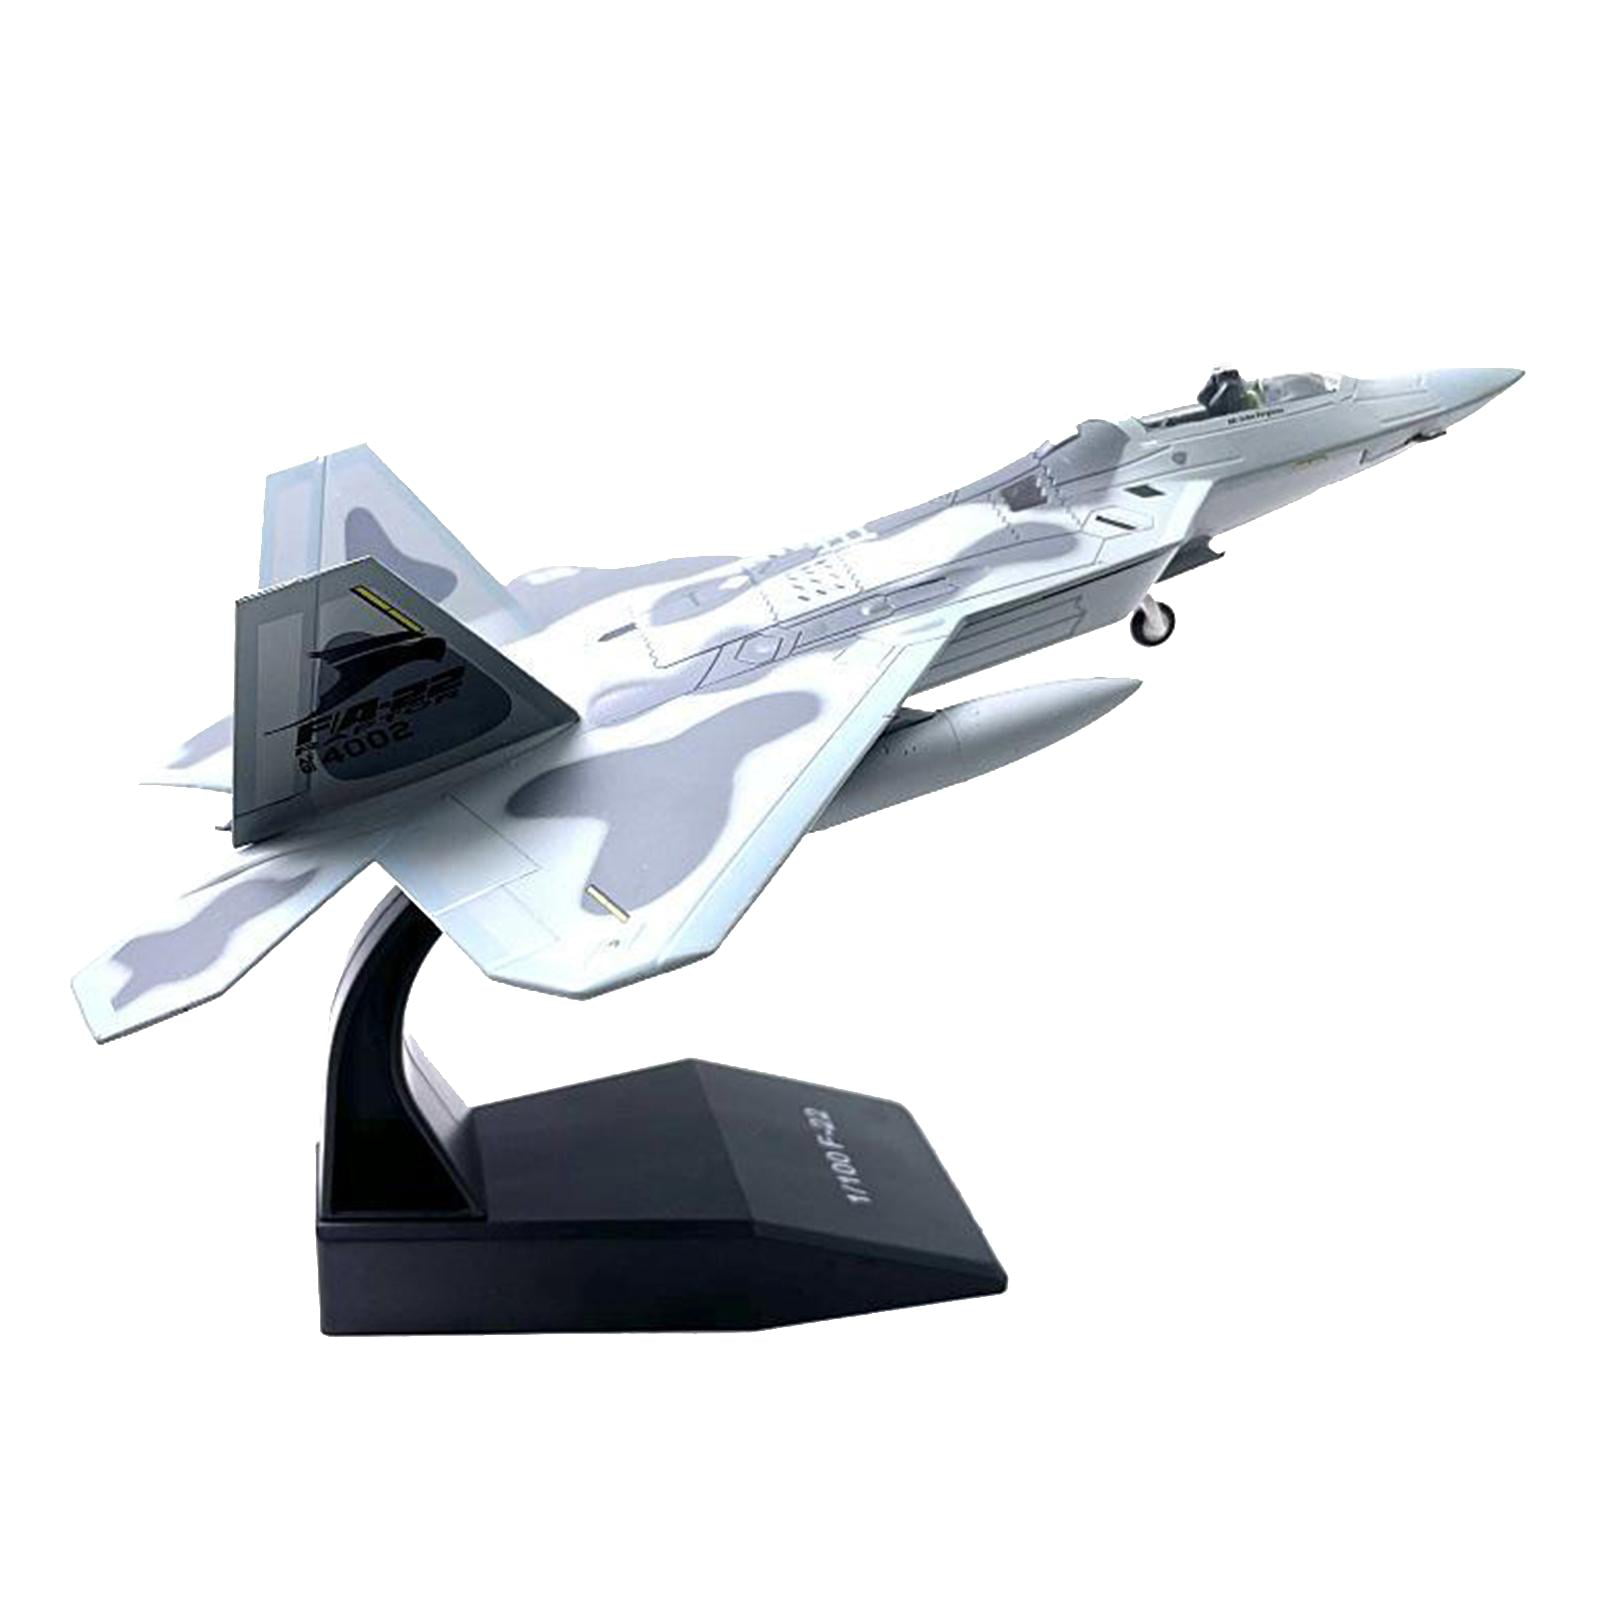 USA Airline F-22 Raptor Plane Fighter Aircraft Plane Table Top Decor 1/100 